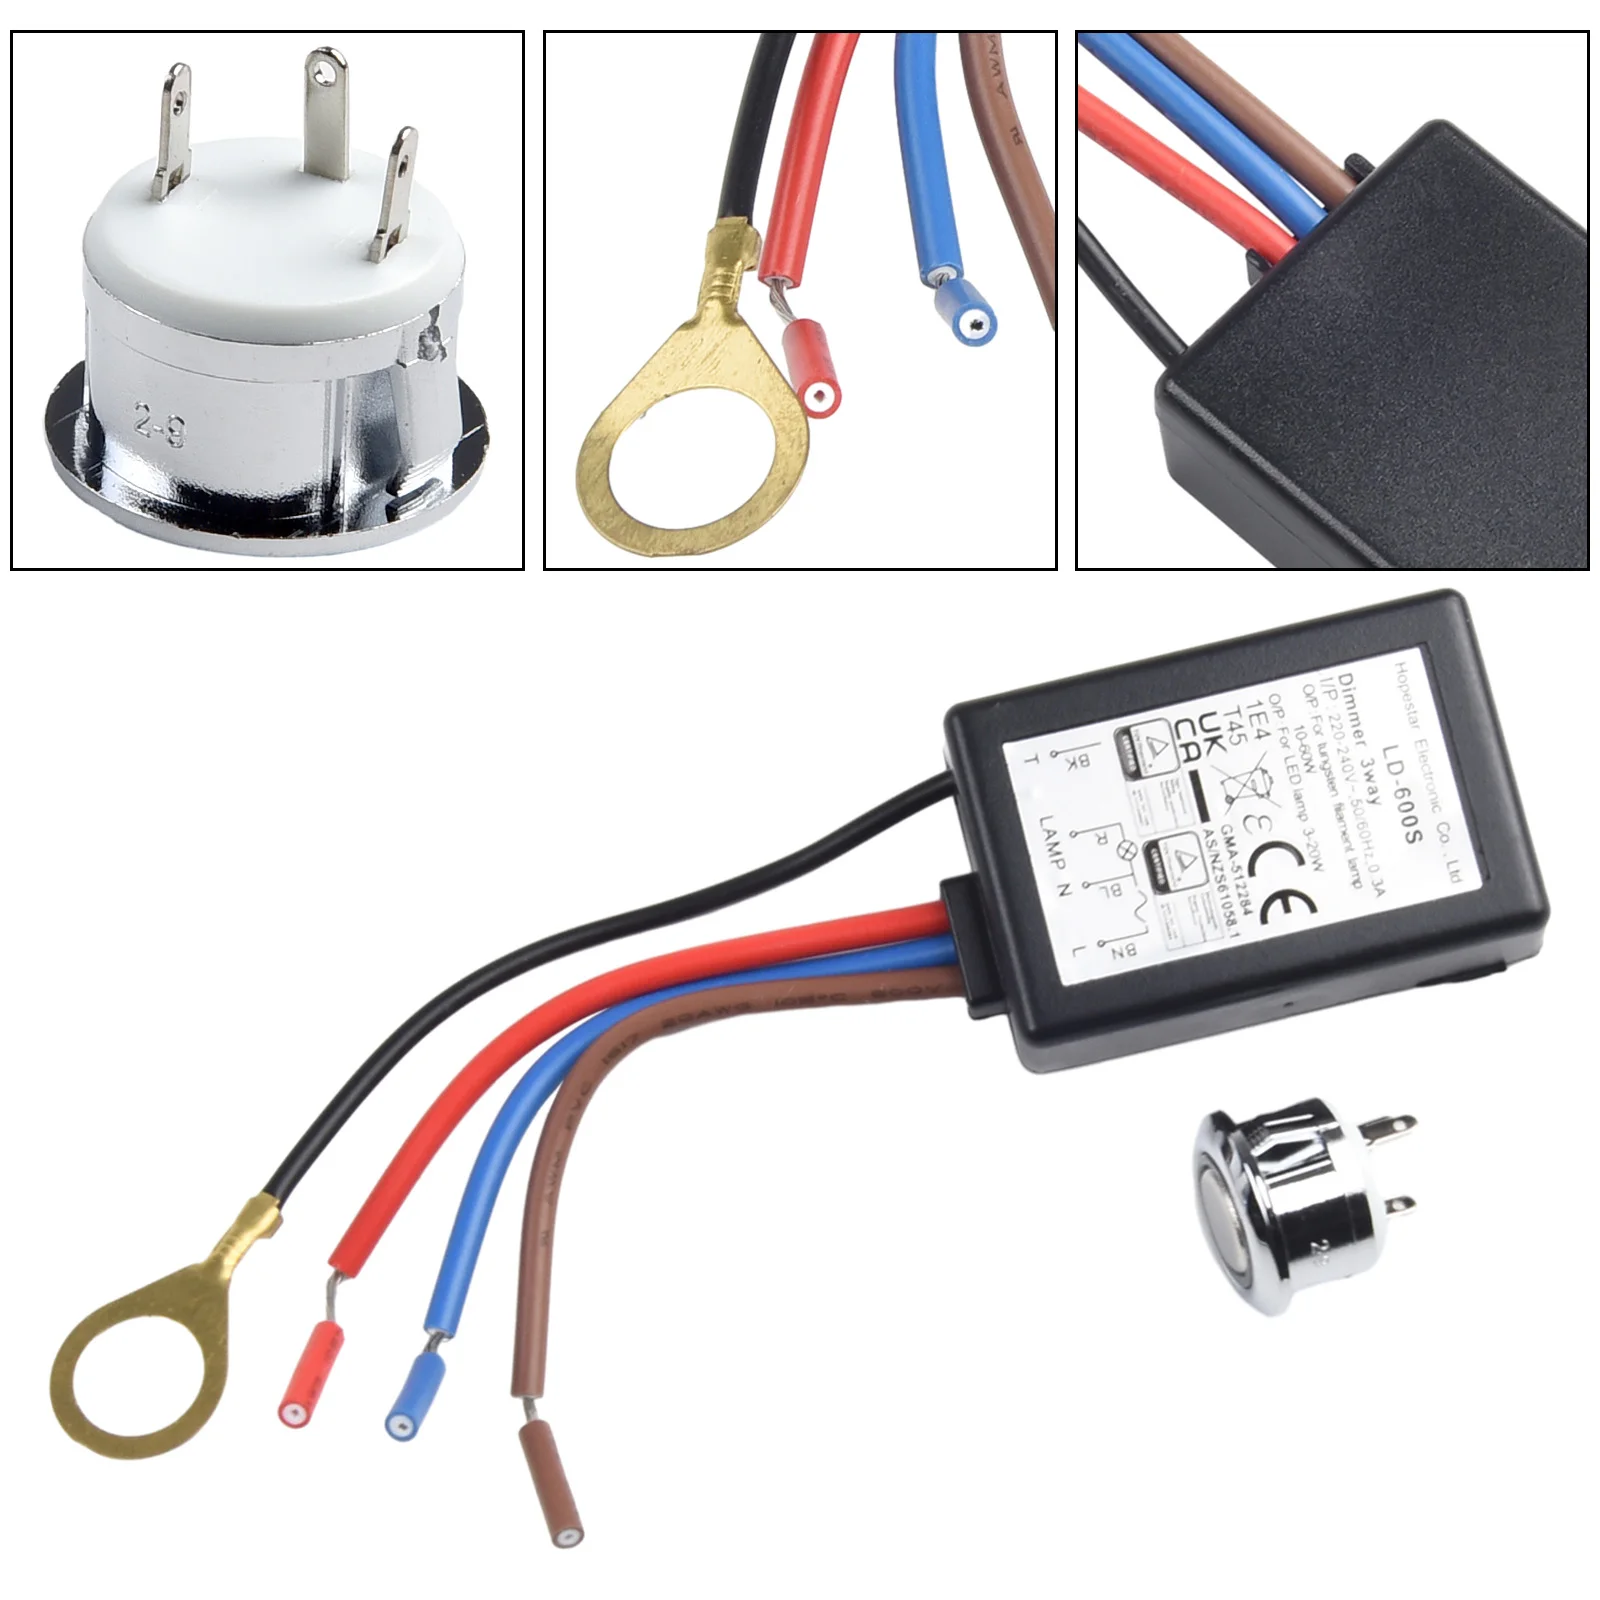 

Touch Switch Inductive Switch 3 Way Touch Dimming Dimming/ON OFF EU Type Inductive Switch LD-600S PVC Black High Quality